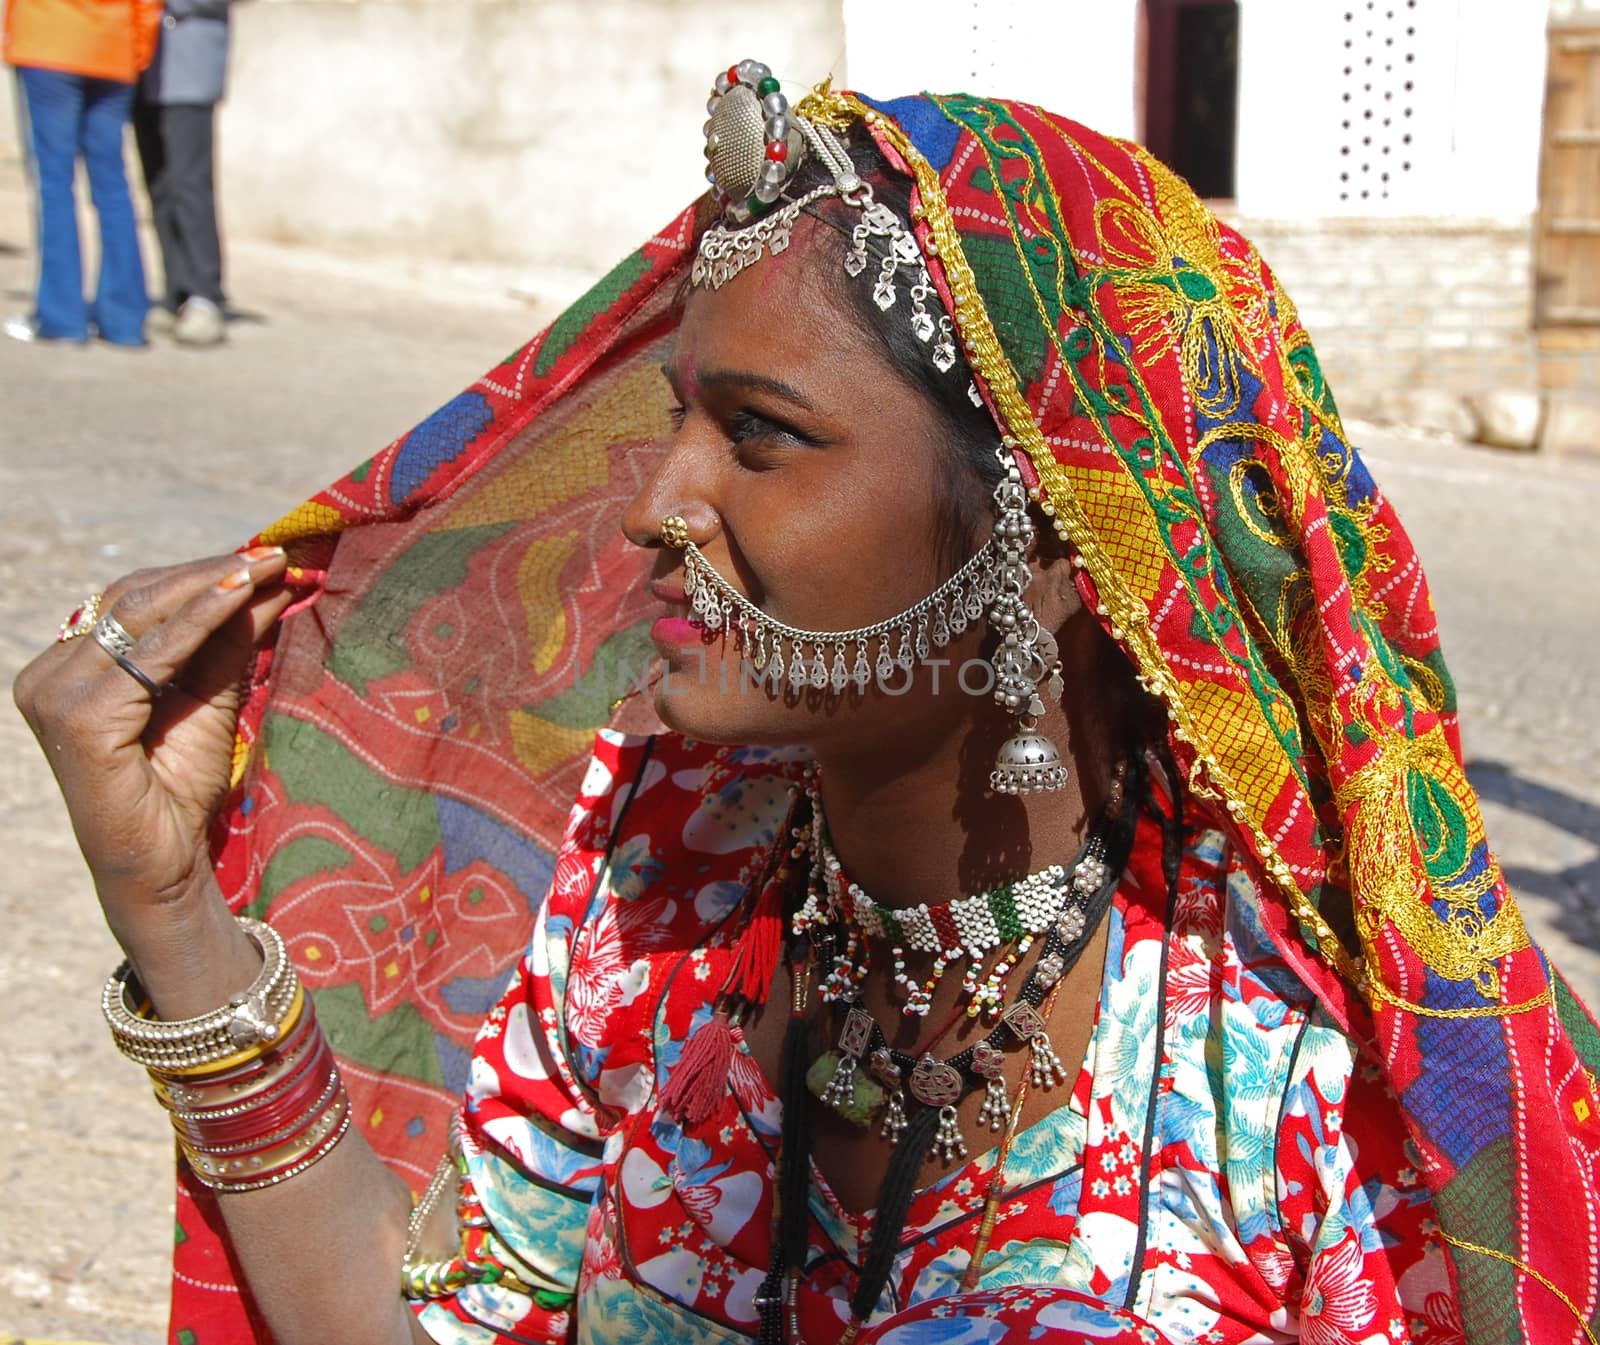 A woman posing on a street in Jaisalmer, India
07 Jan 2009
No model release
Editorial only